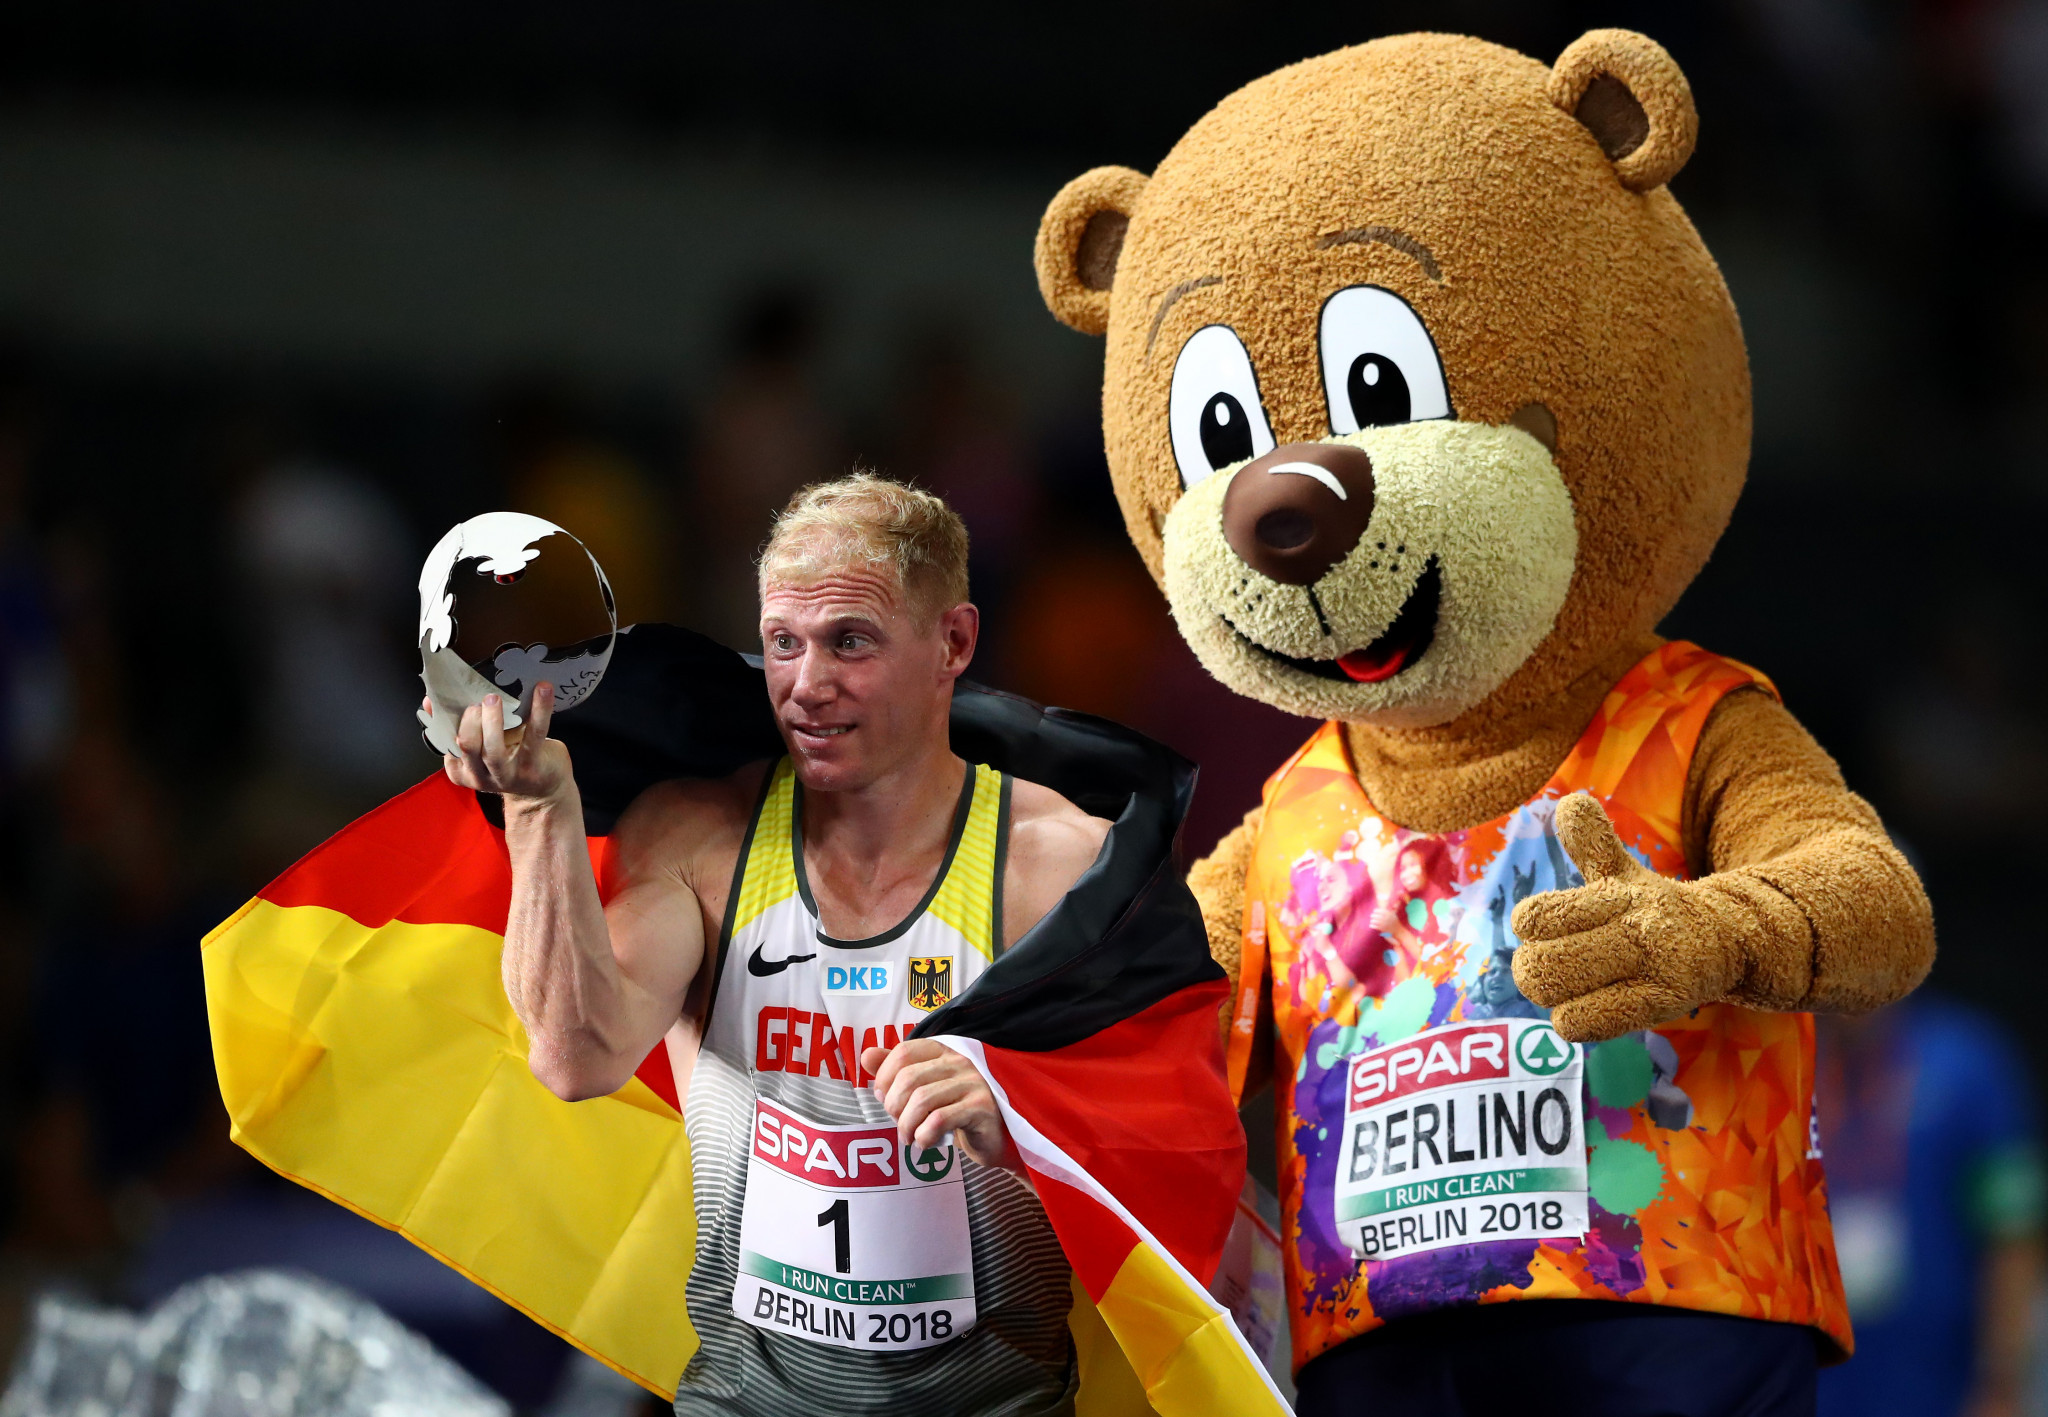 insidethegames is reporting LIVE from the 2018 European Championships in Glasgow and Berlin